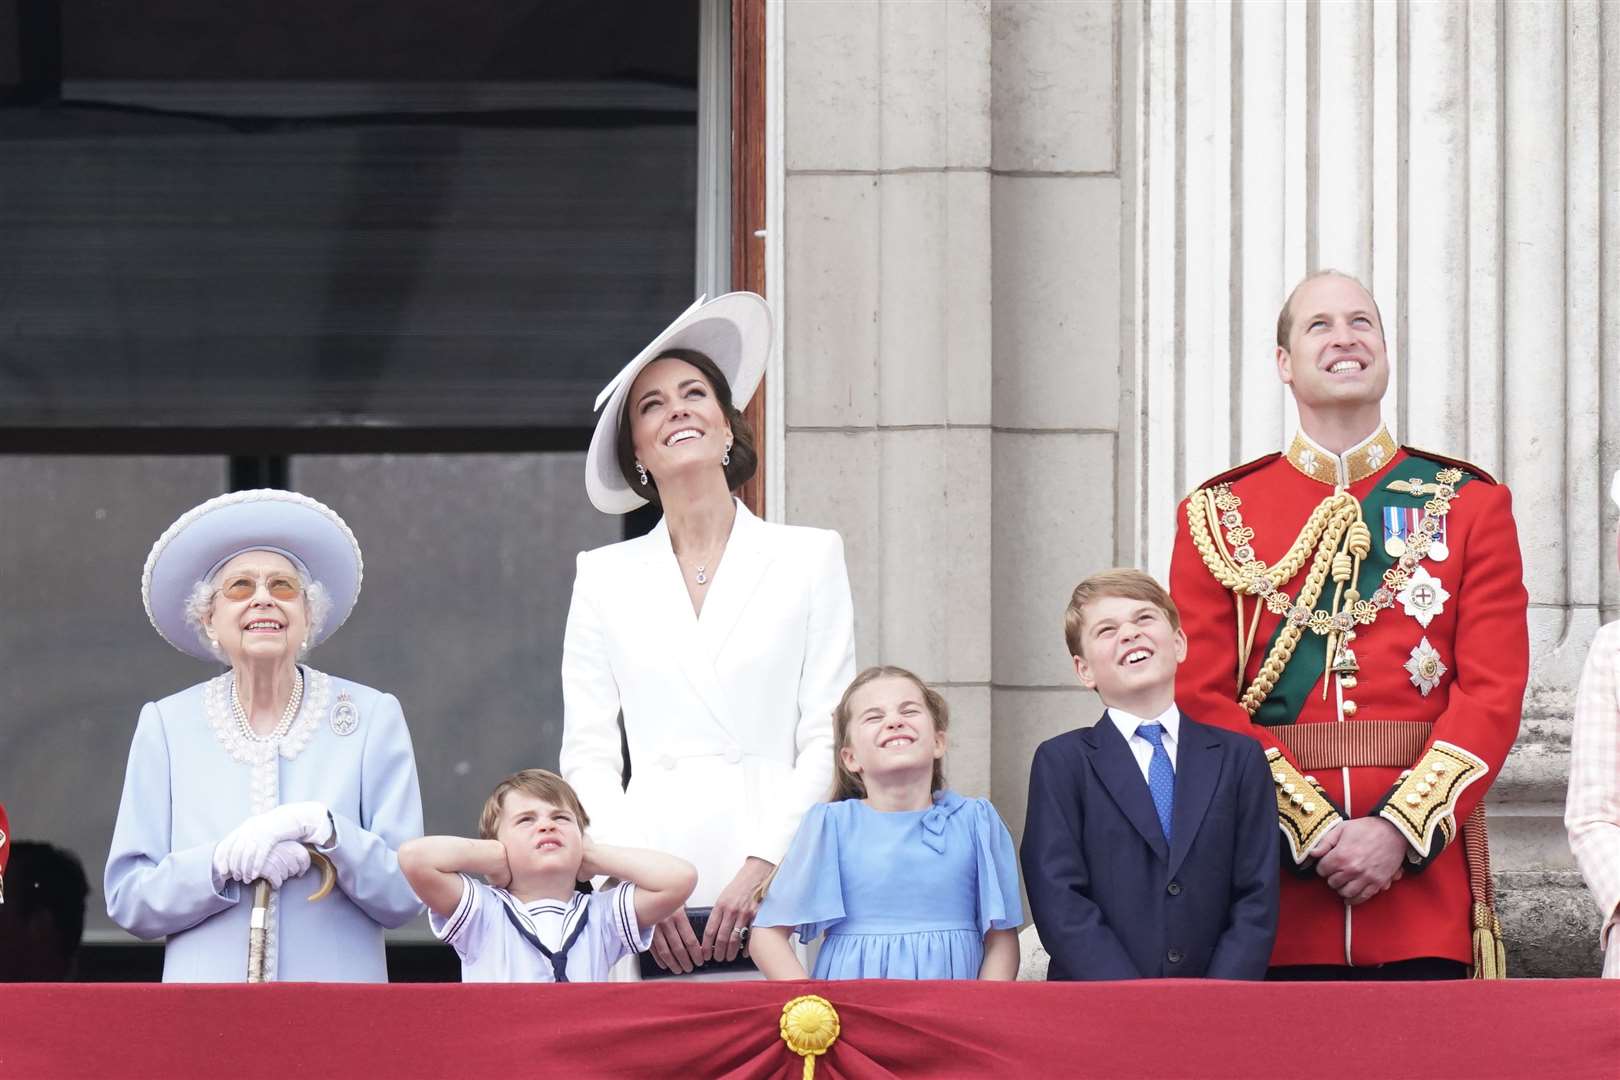 The Queen, Prince Louis, the Duchess of Cambridge, Princess Charlotte, Prince George and the Duke of Cambridge on the balcony of Buckingham Palace (Aaron Chown/PA)